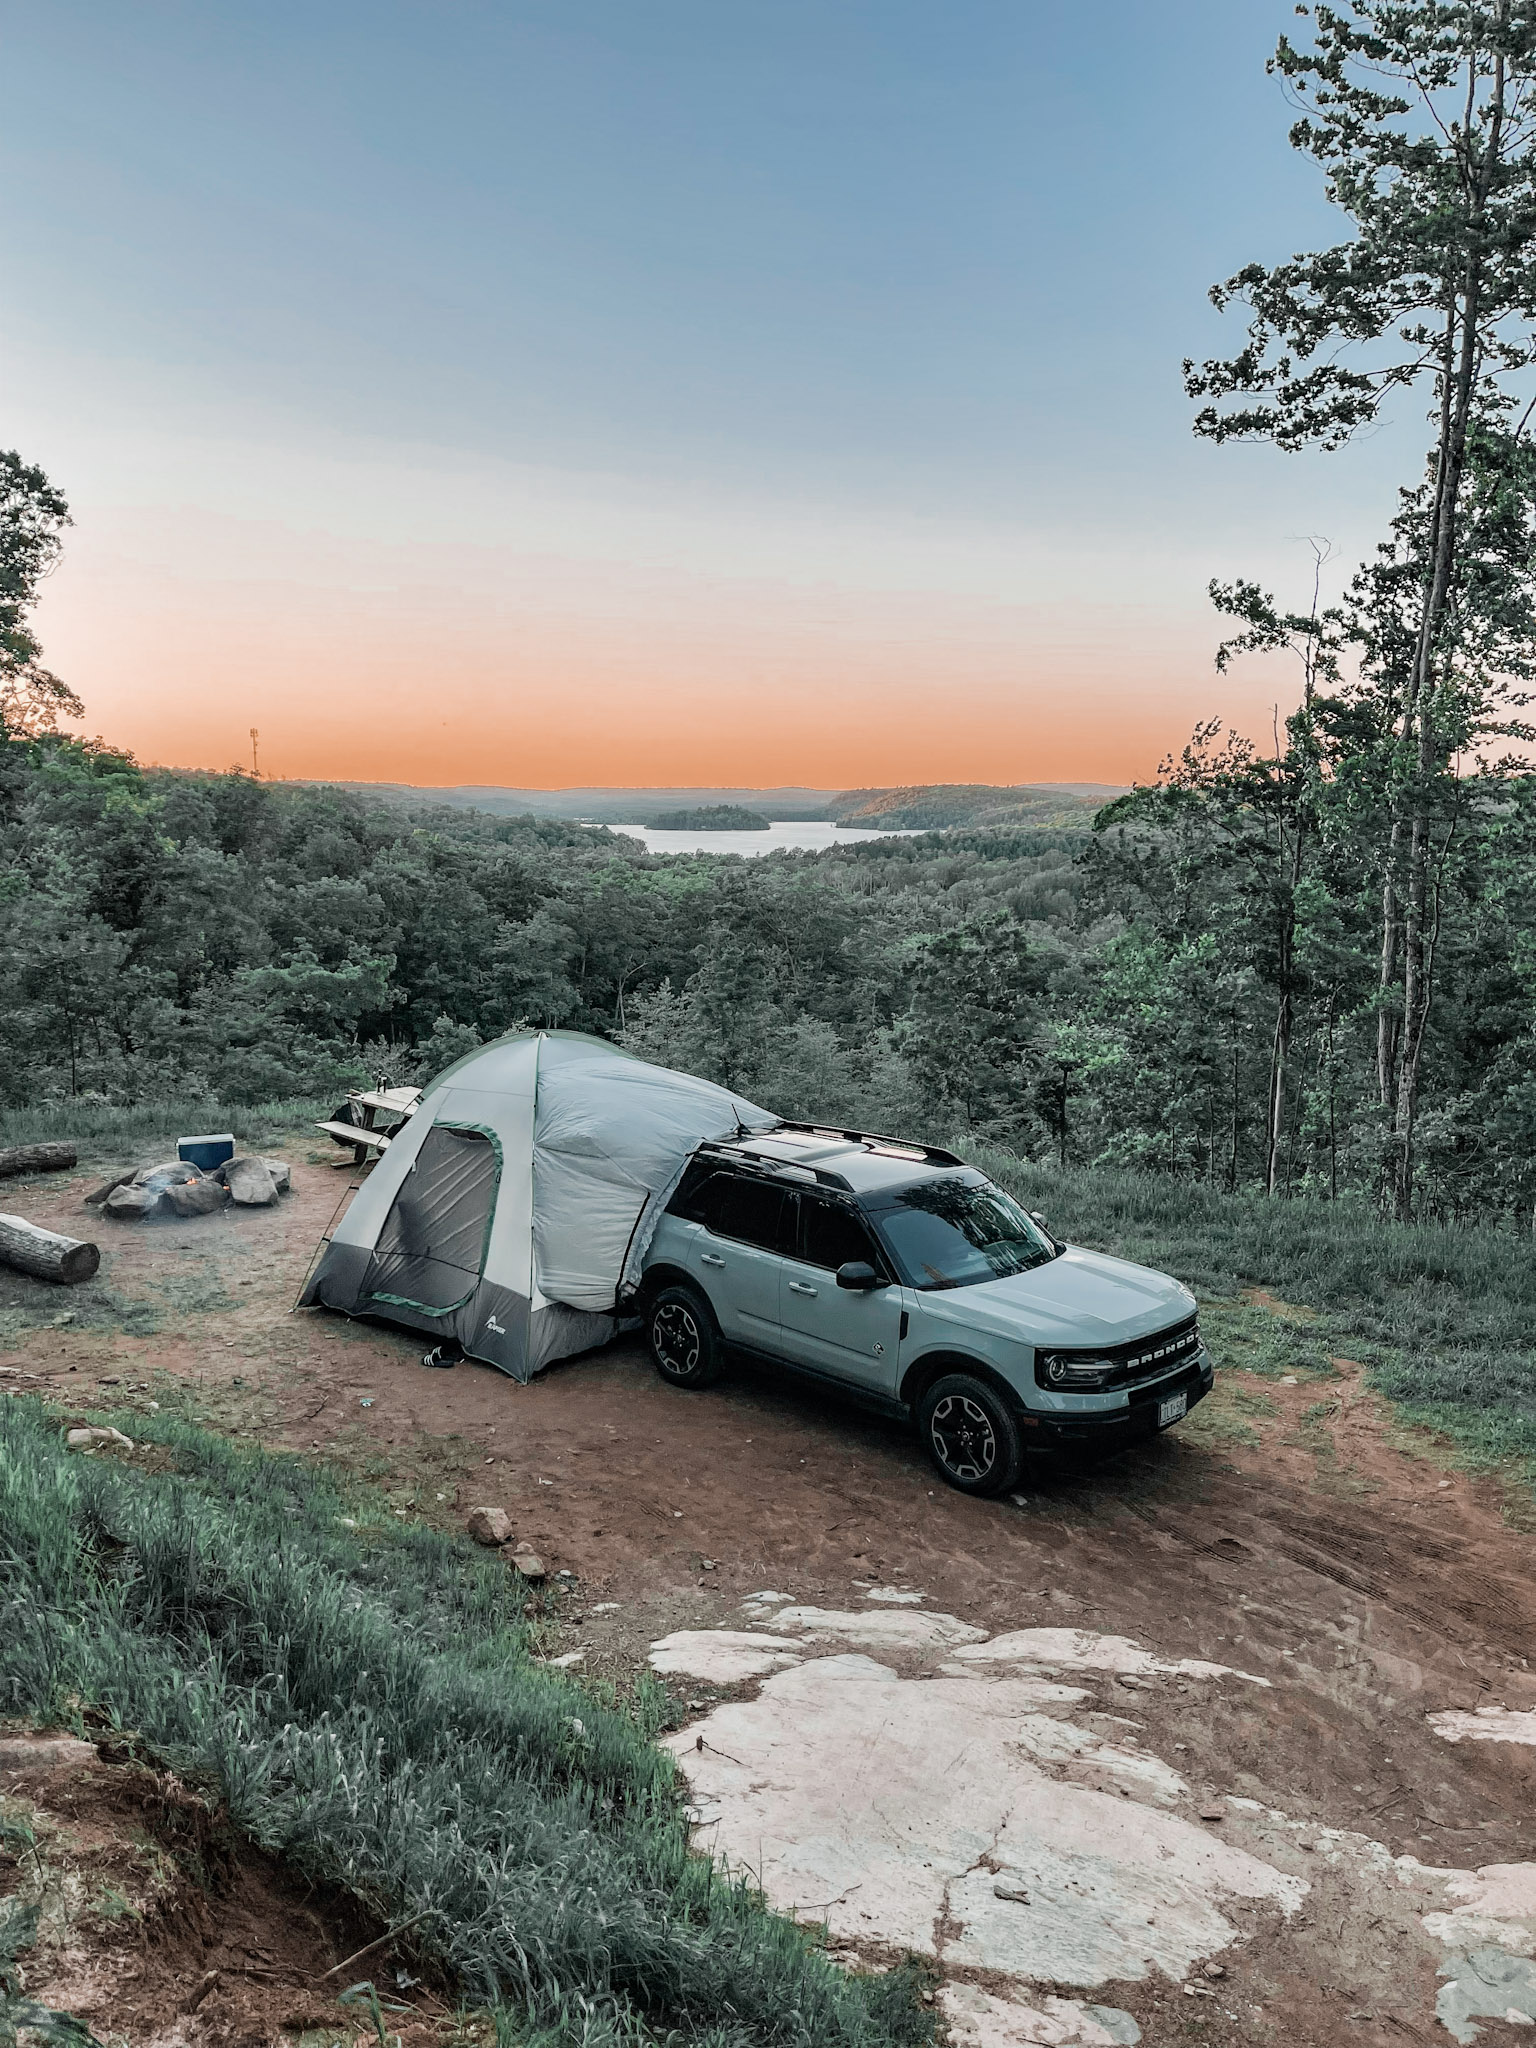 10 Tips for Your Next Car Camping Adventure - Napier Outdoors - US